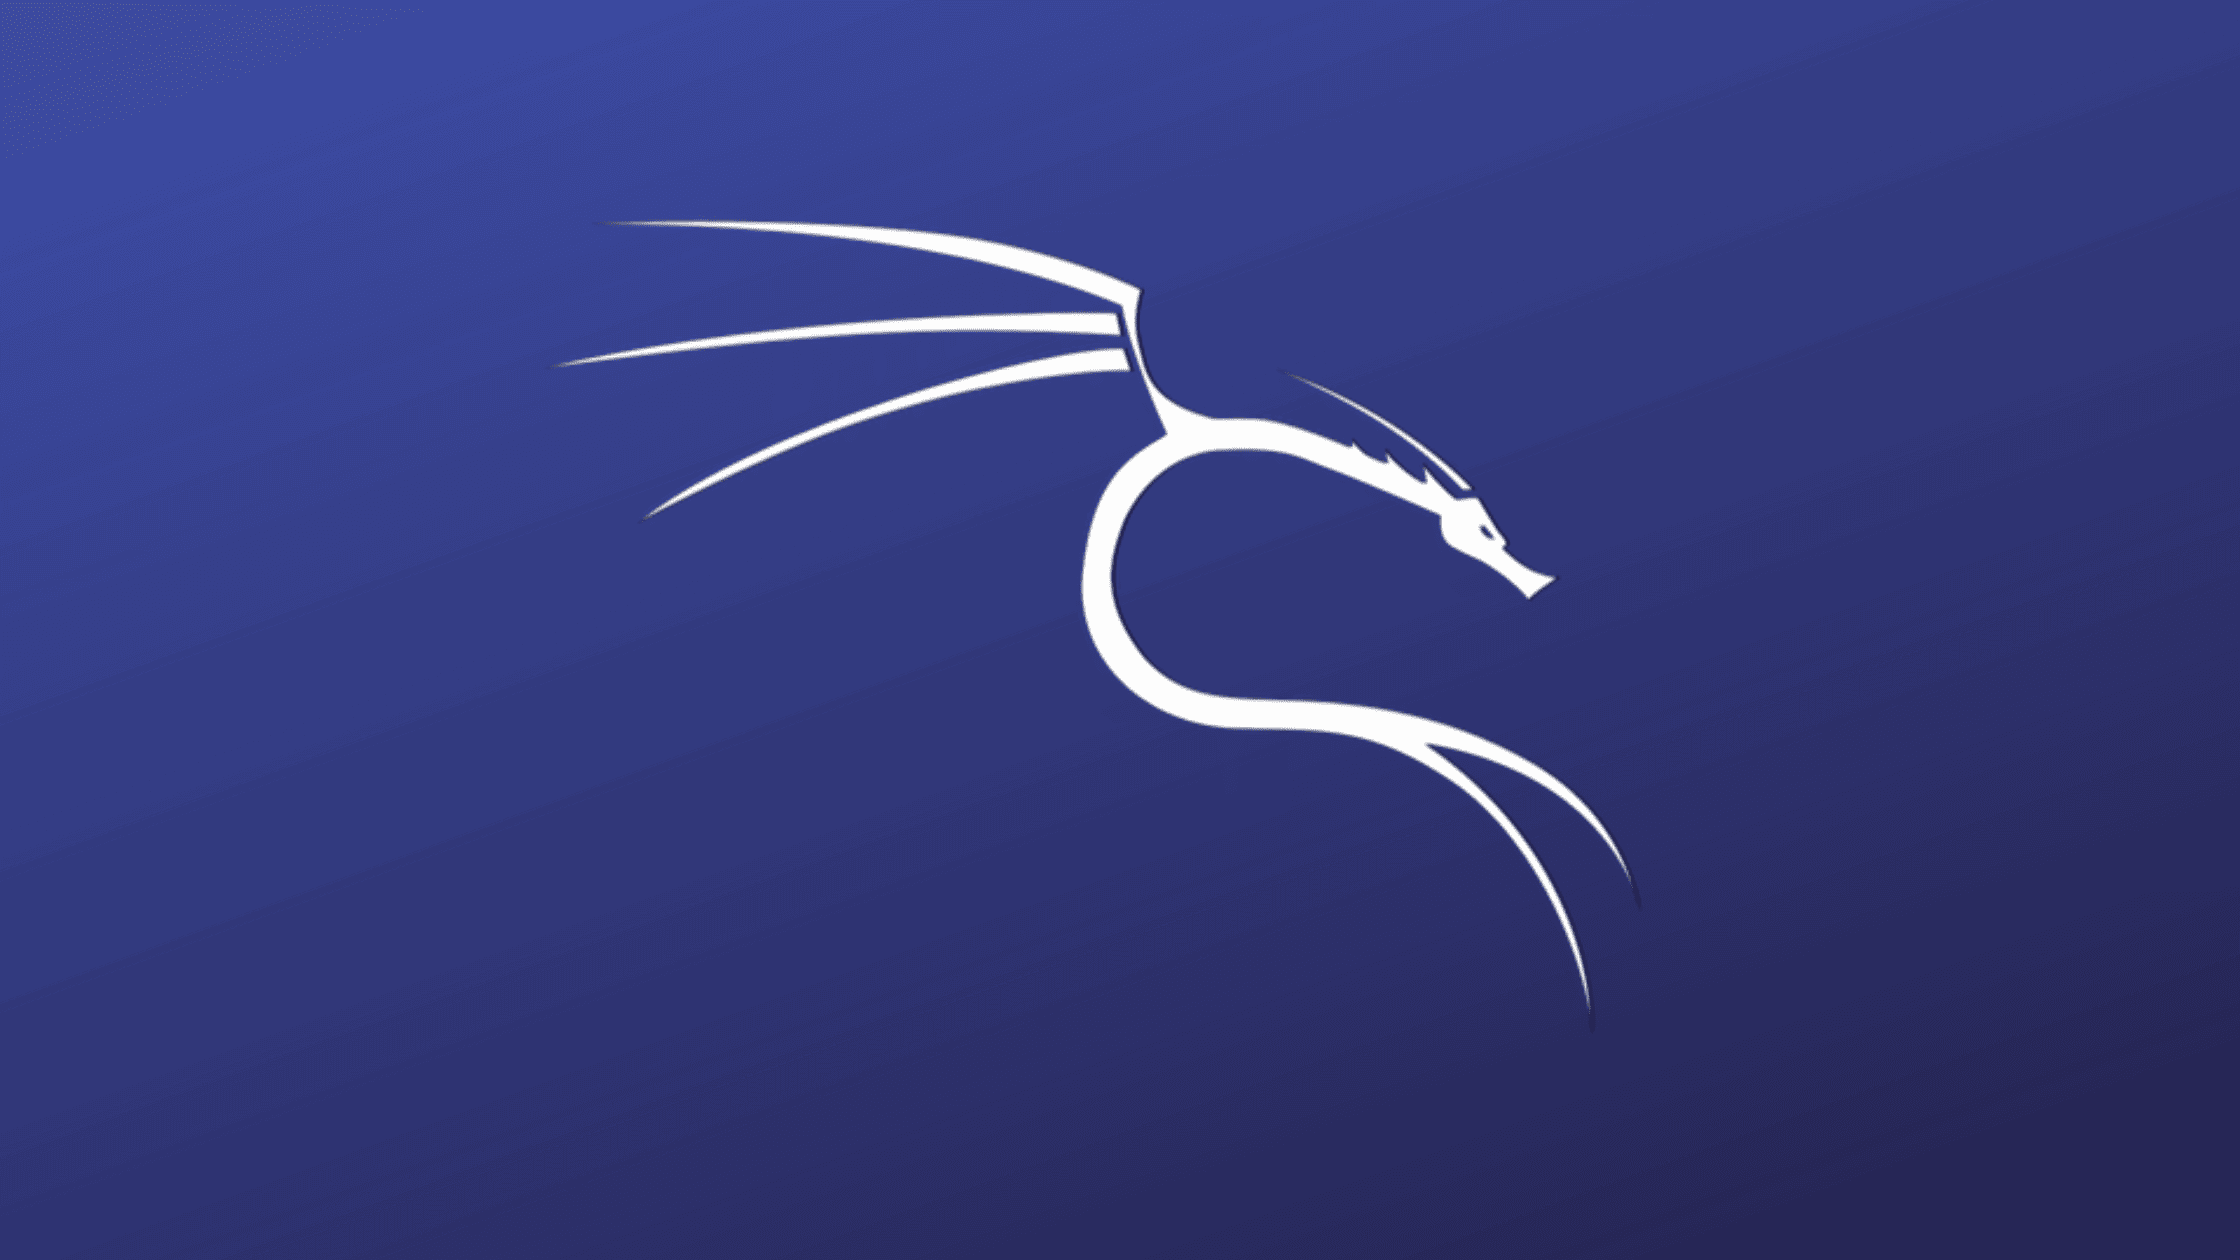 What Is New In Kali Linux 2023 2 And How To Upgrade Kali Linux To 2023 2